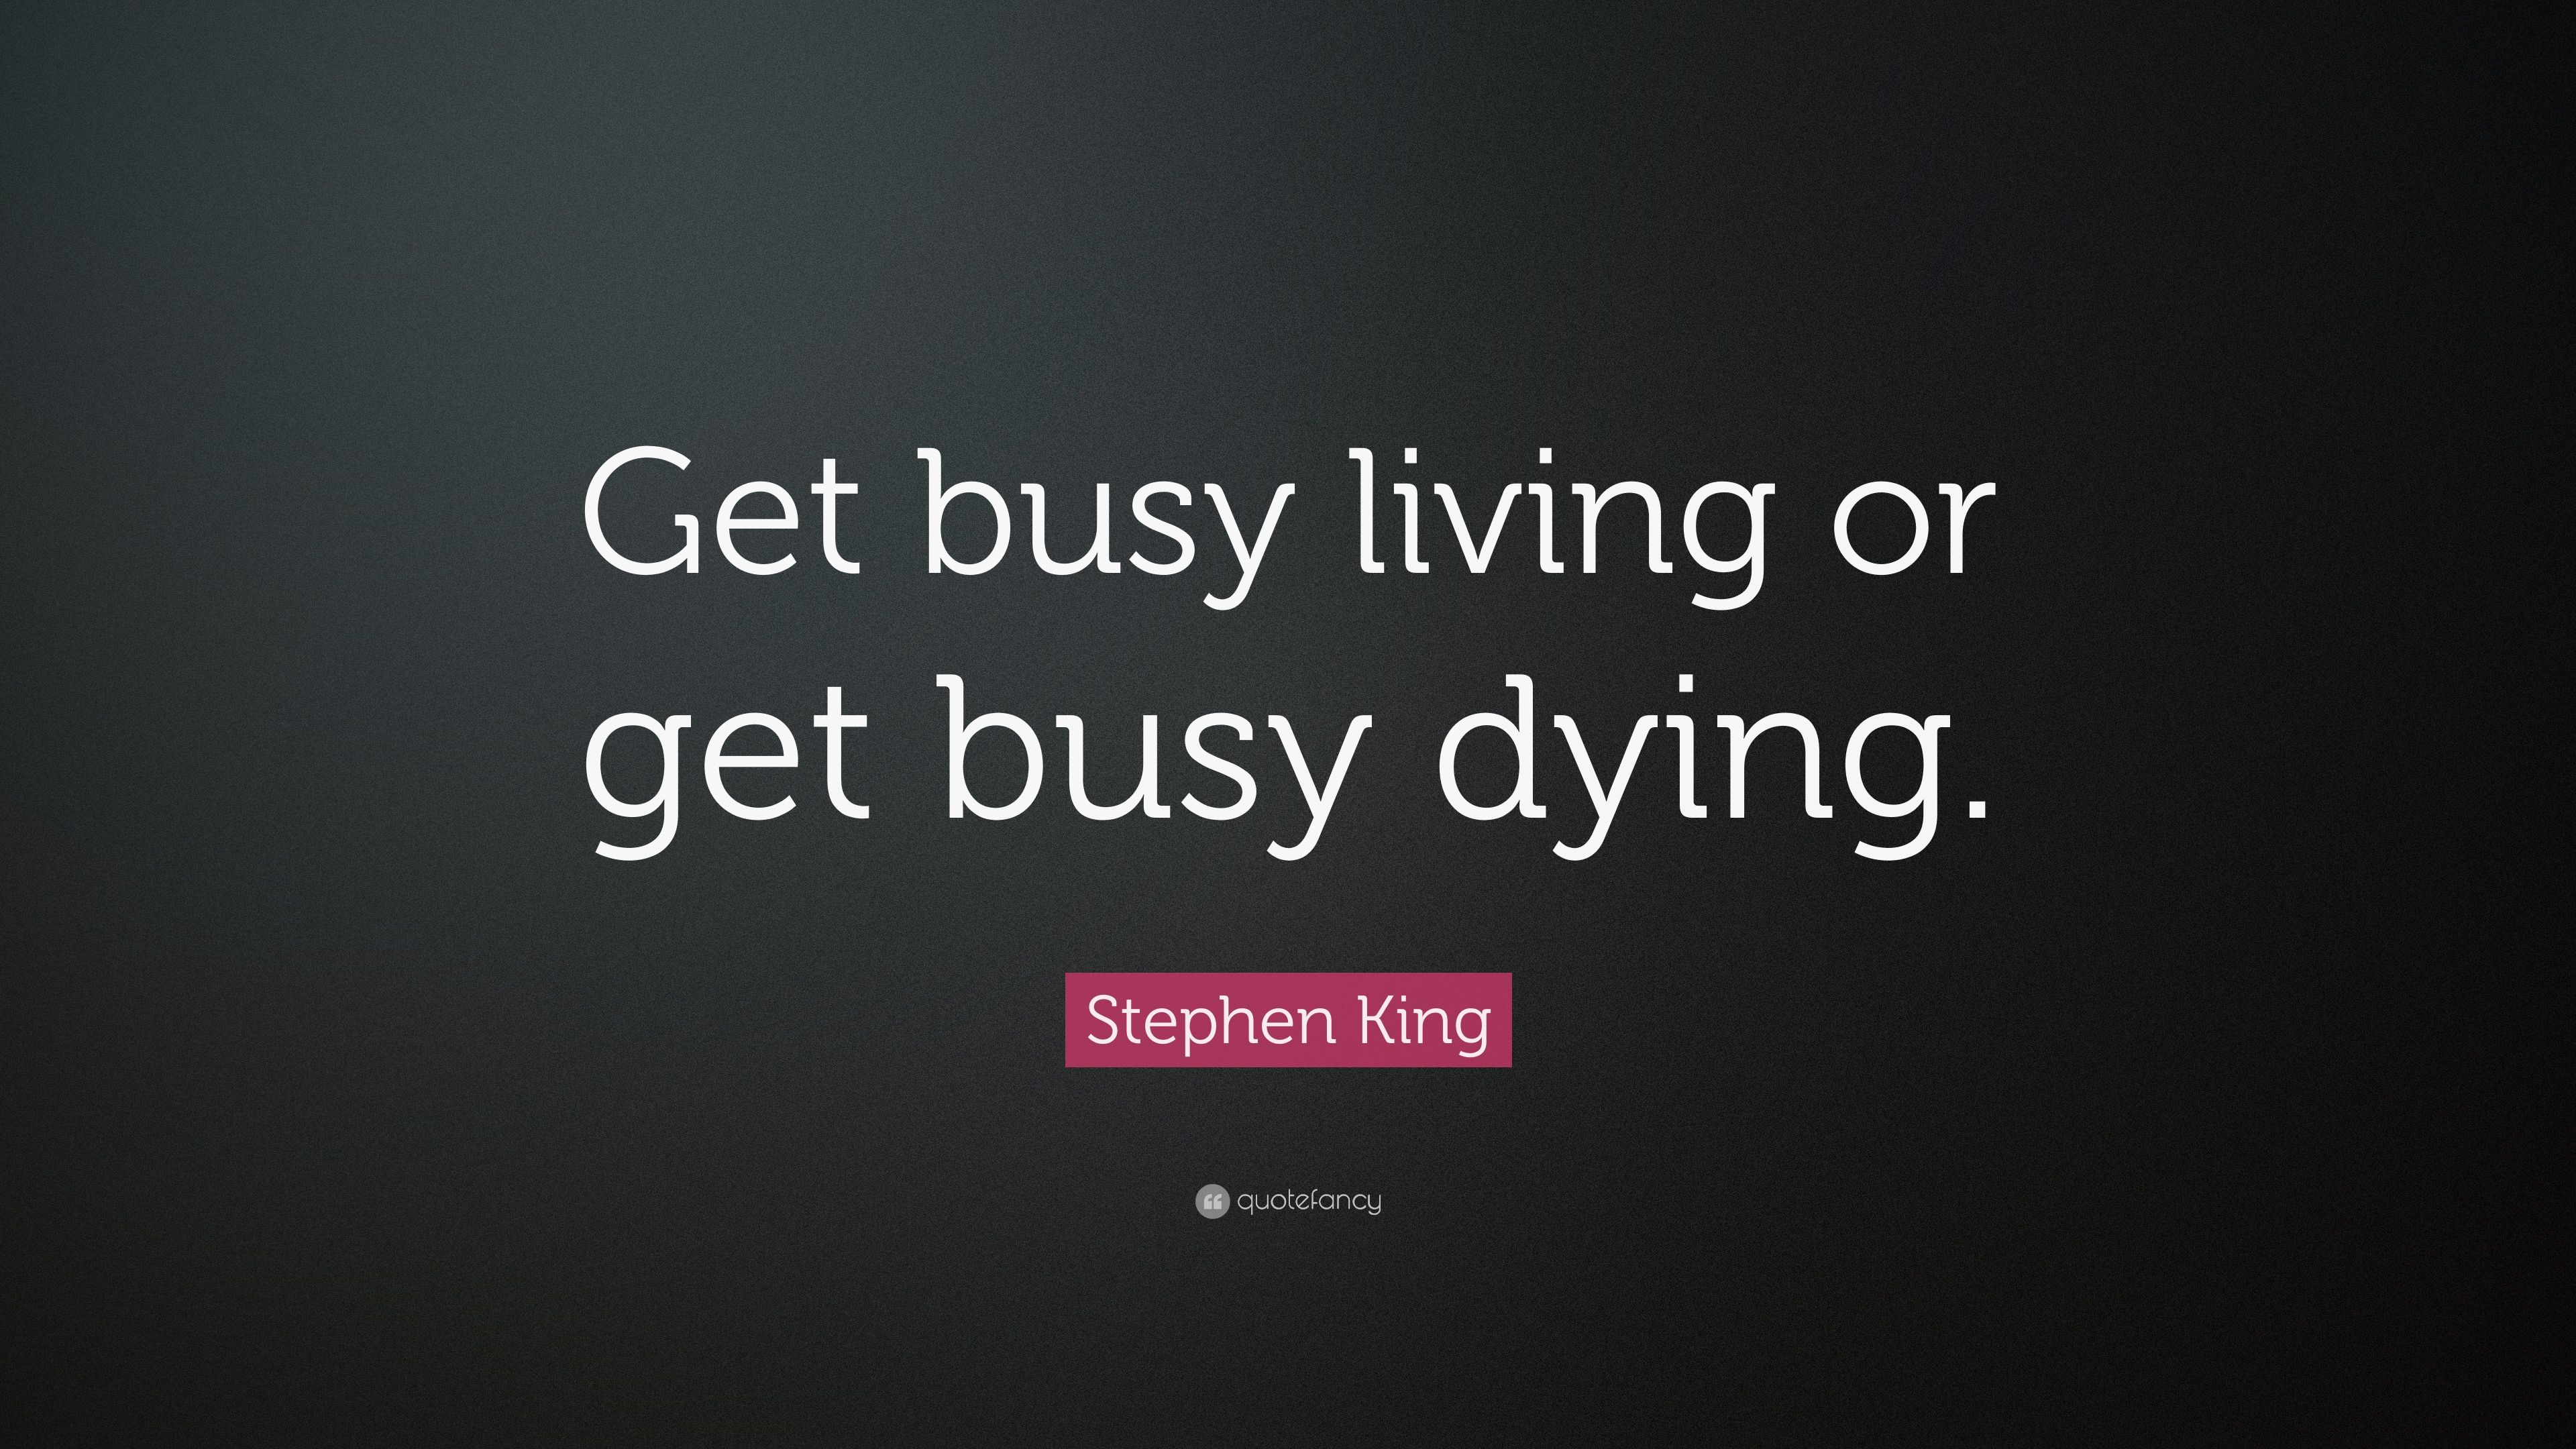 Stephen King Quote: “Get busy living or get busy dying.” (14 ...